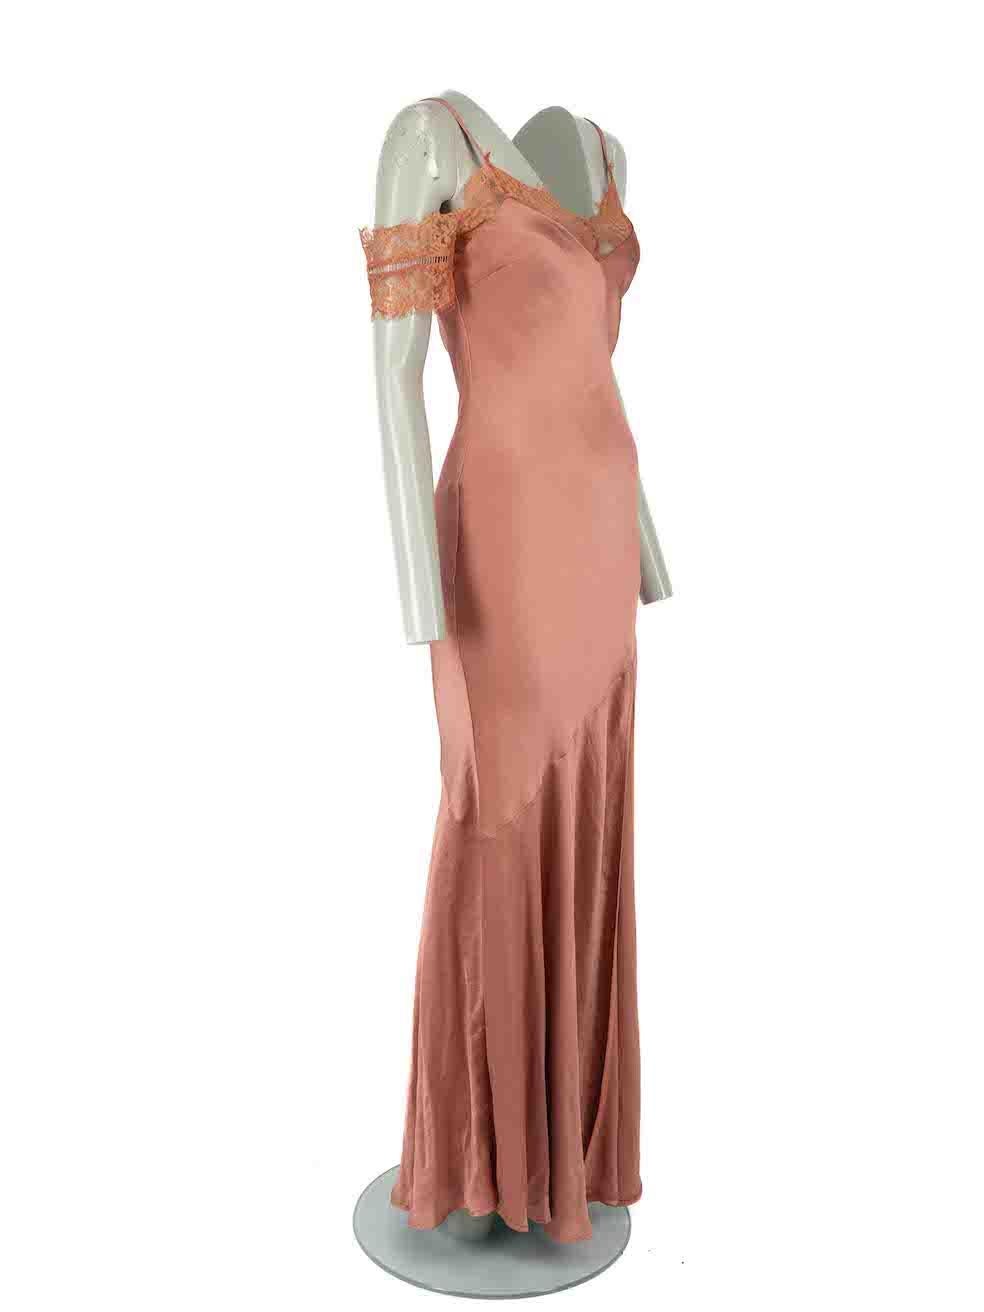 CONDITION is Never worn, with tags. Minor pulls to overall fabric due to poor storage of this new Nicholas designer resale item.

Details
Rust pink
Silk
Maxi dress
Lace trimmed
V neckline
Adjustable shoulder strap
Back zip closure with hook and